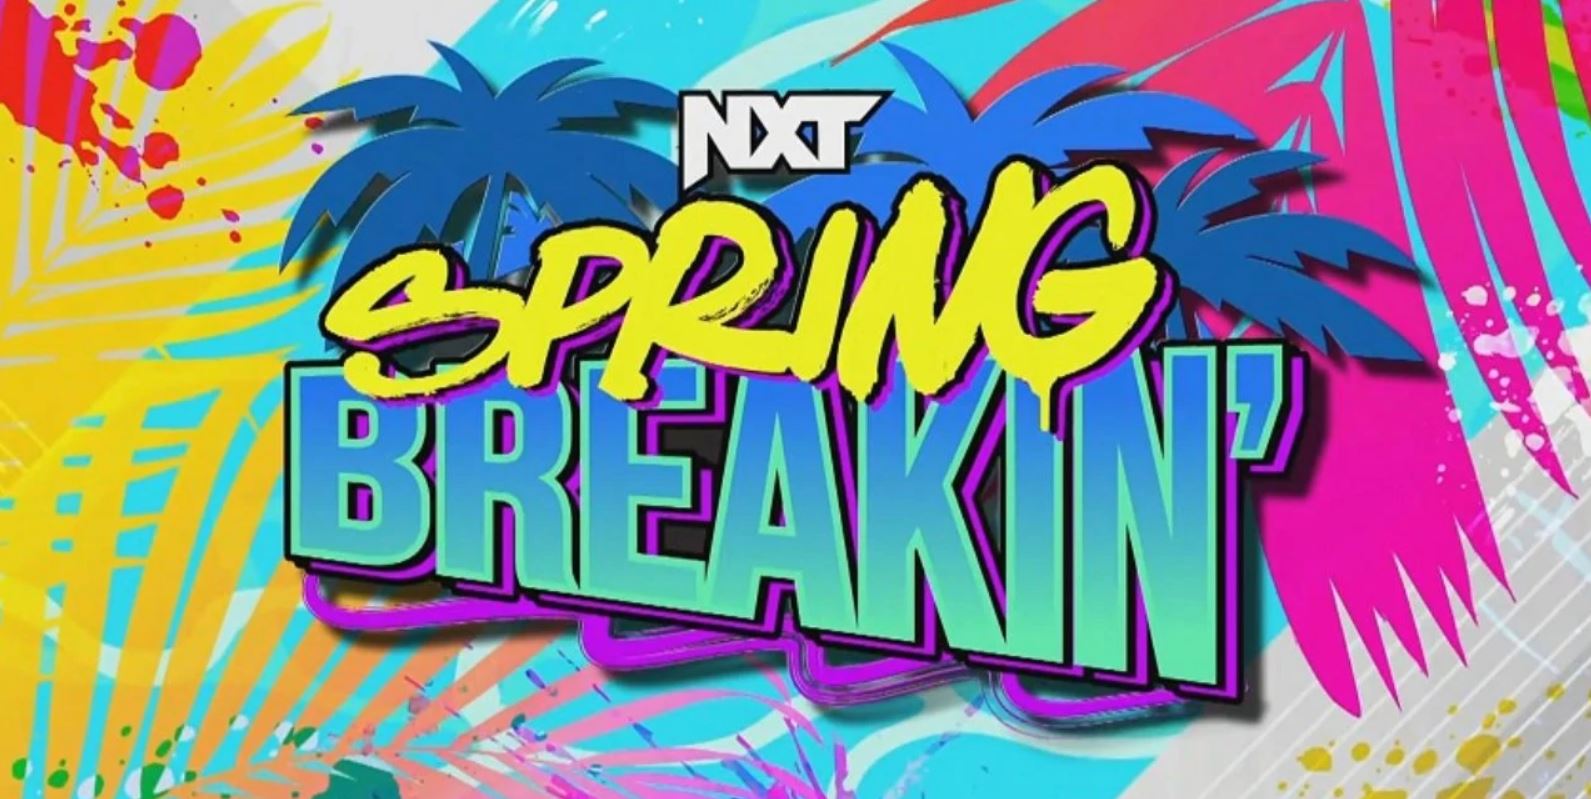 Dragon Lee to Compete for WWE NXT Title Shot at Spring Breakin' Event